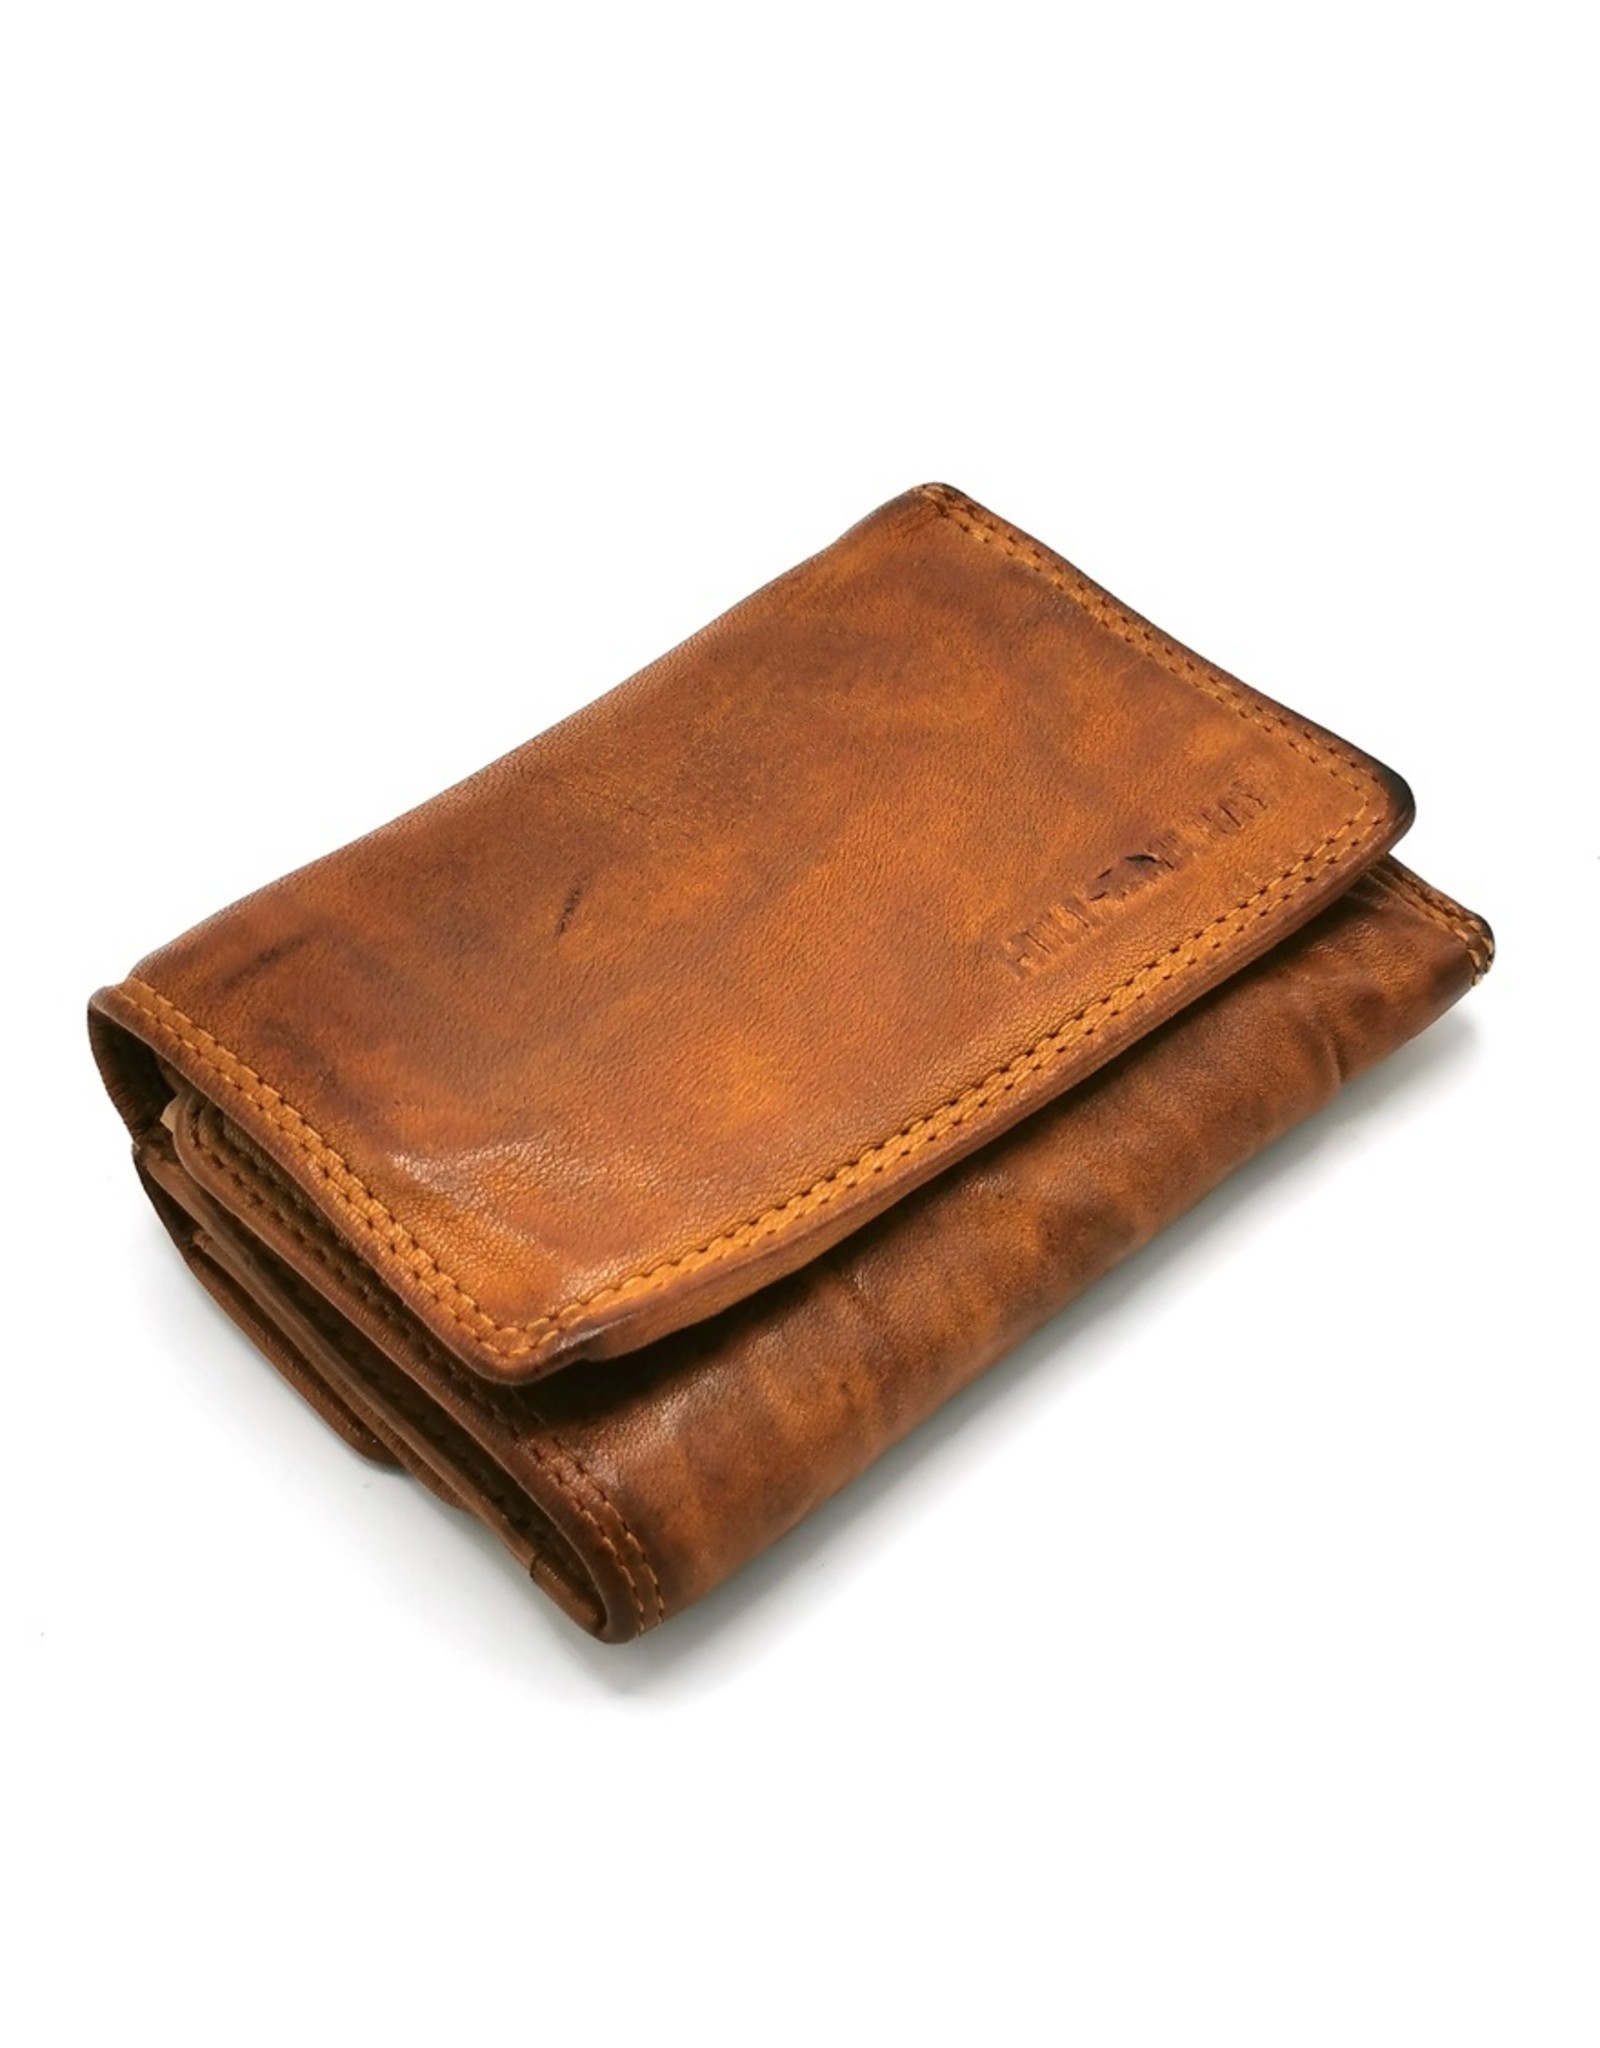 HillBurry Leather Wallets - Hillburry Wallet Washed Leather Medium